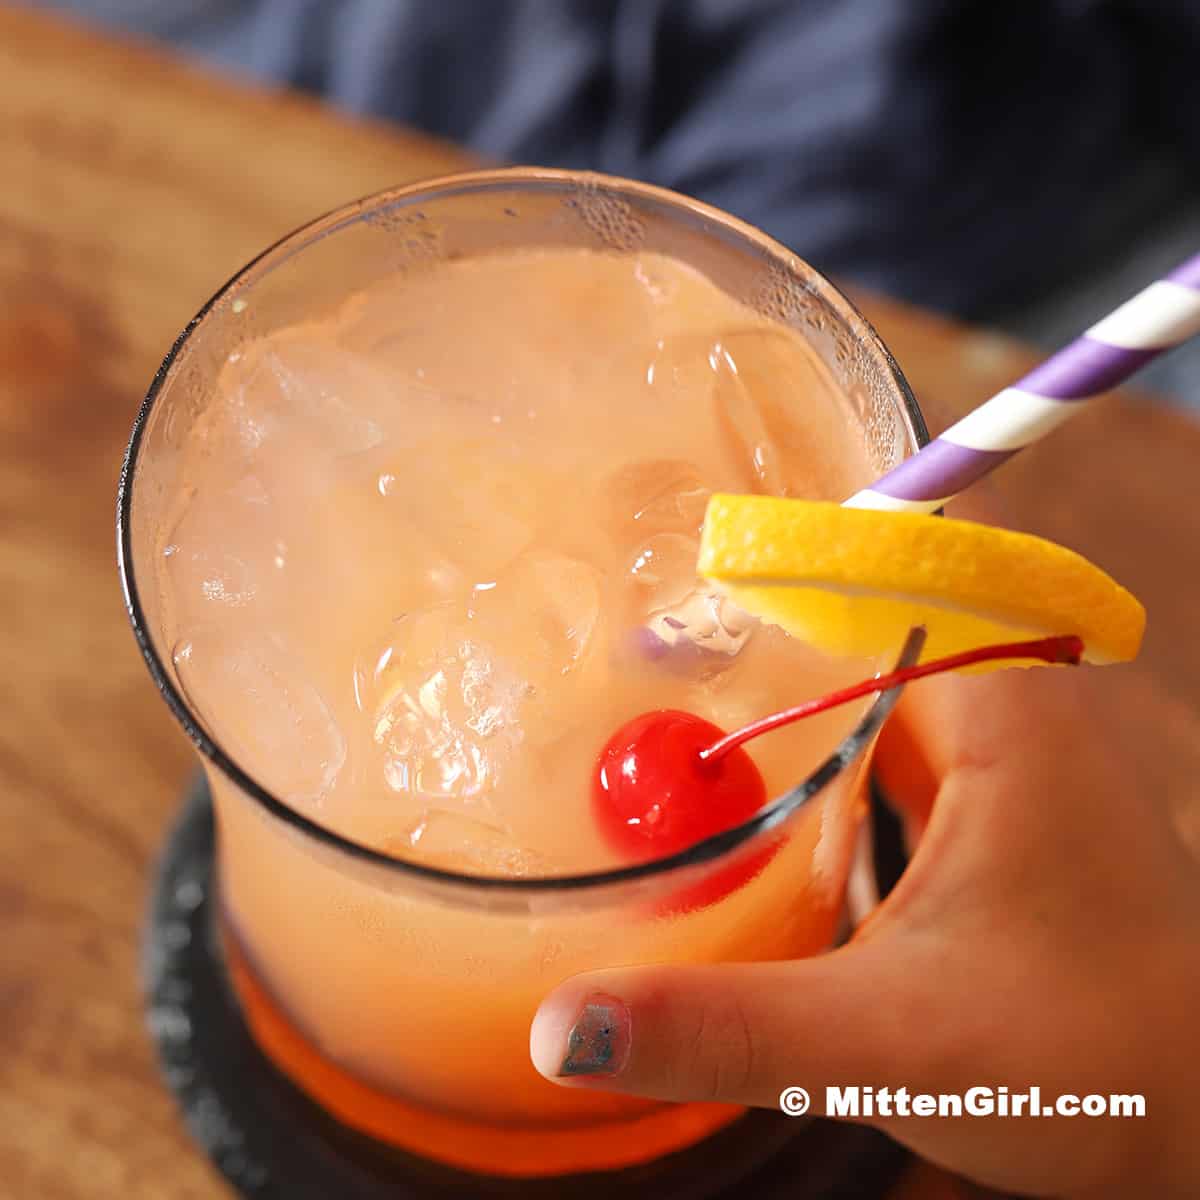 Glass filled with mocktail drink and garnished with a cherry and orange slice.